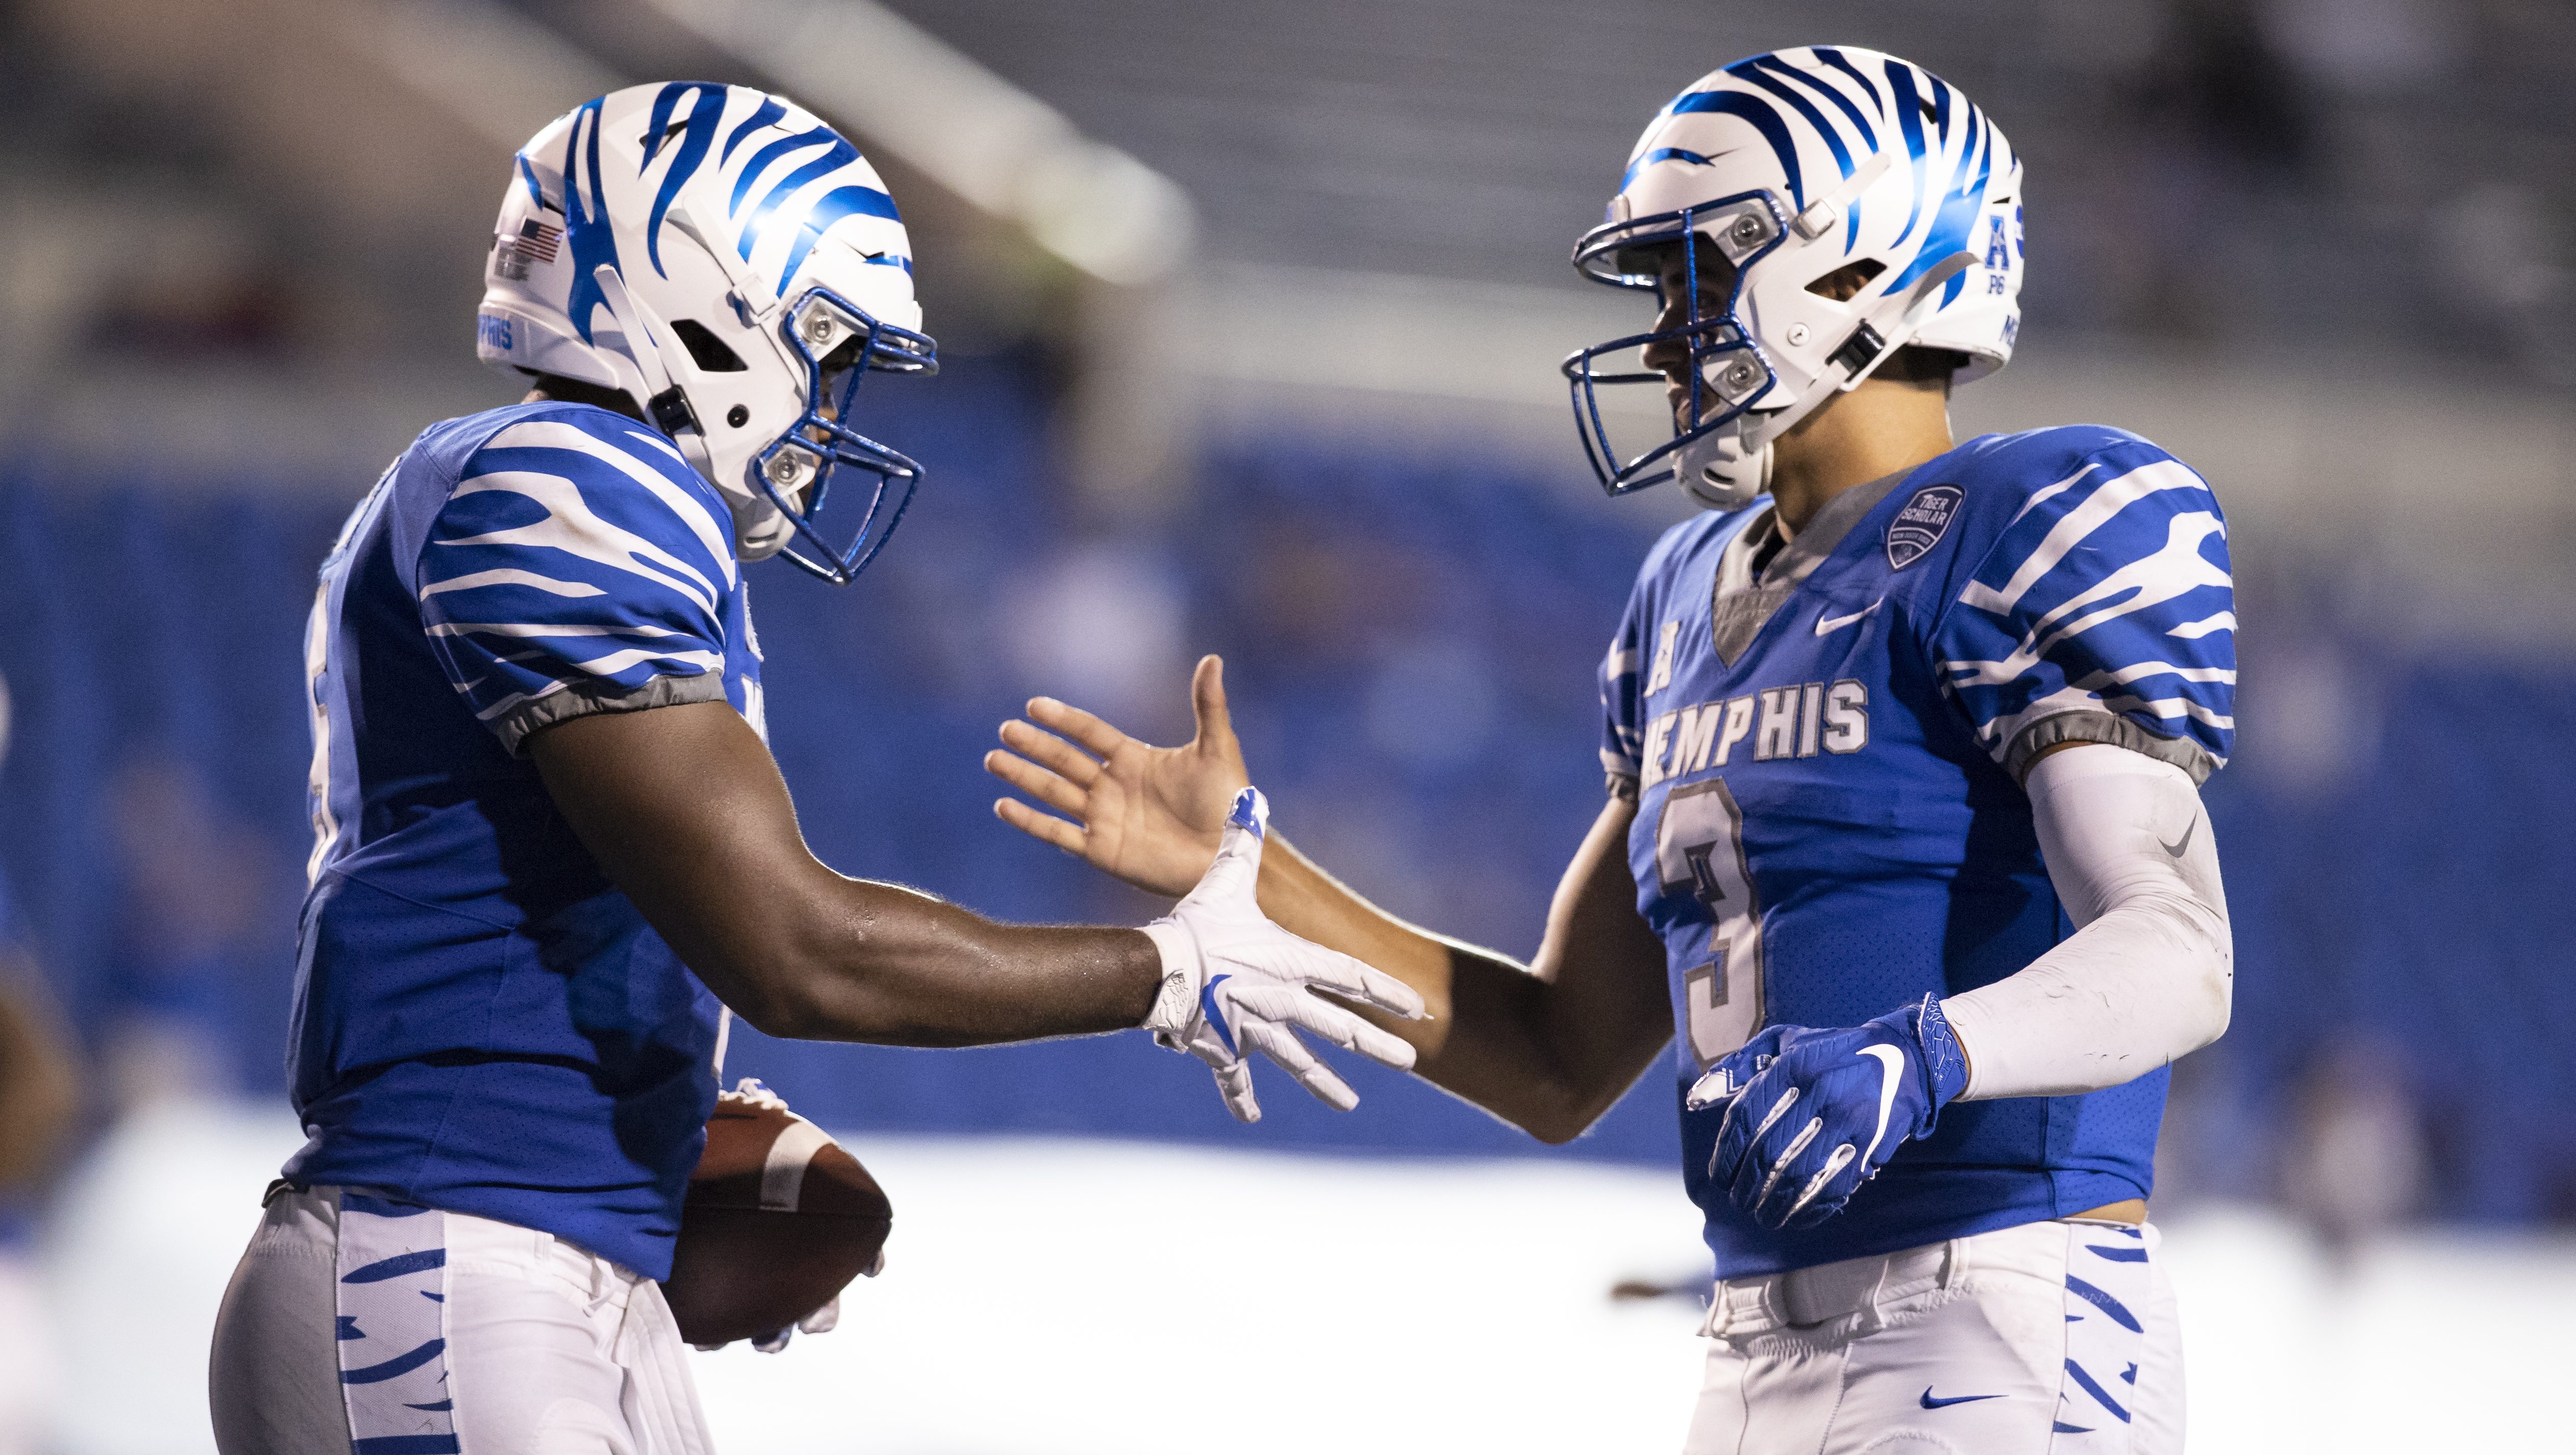 USF vs Memphis Football 2020: How to Watch on ESPN+ ...